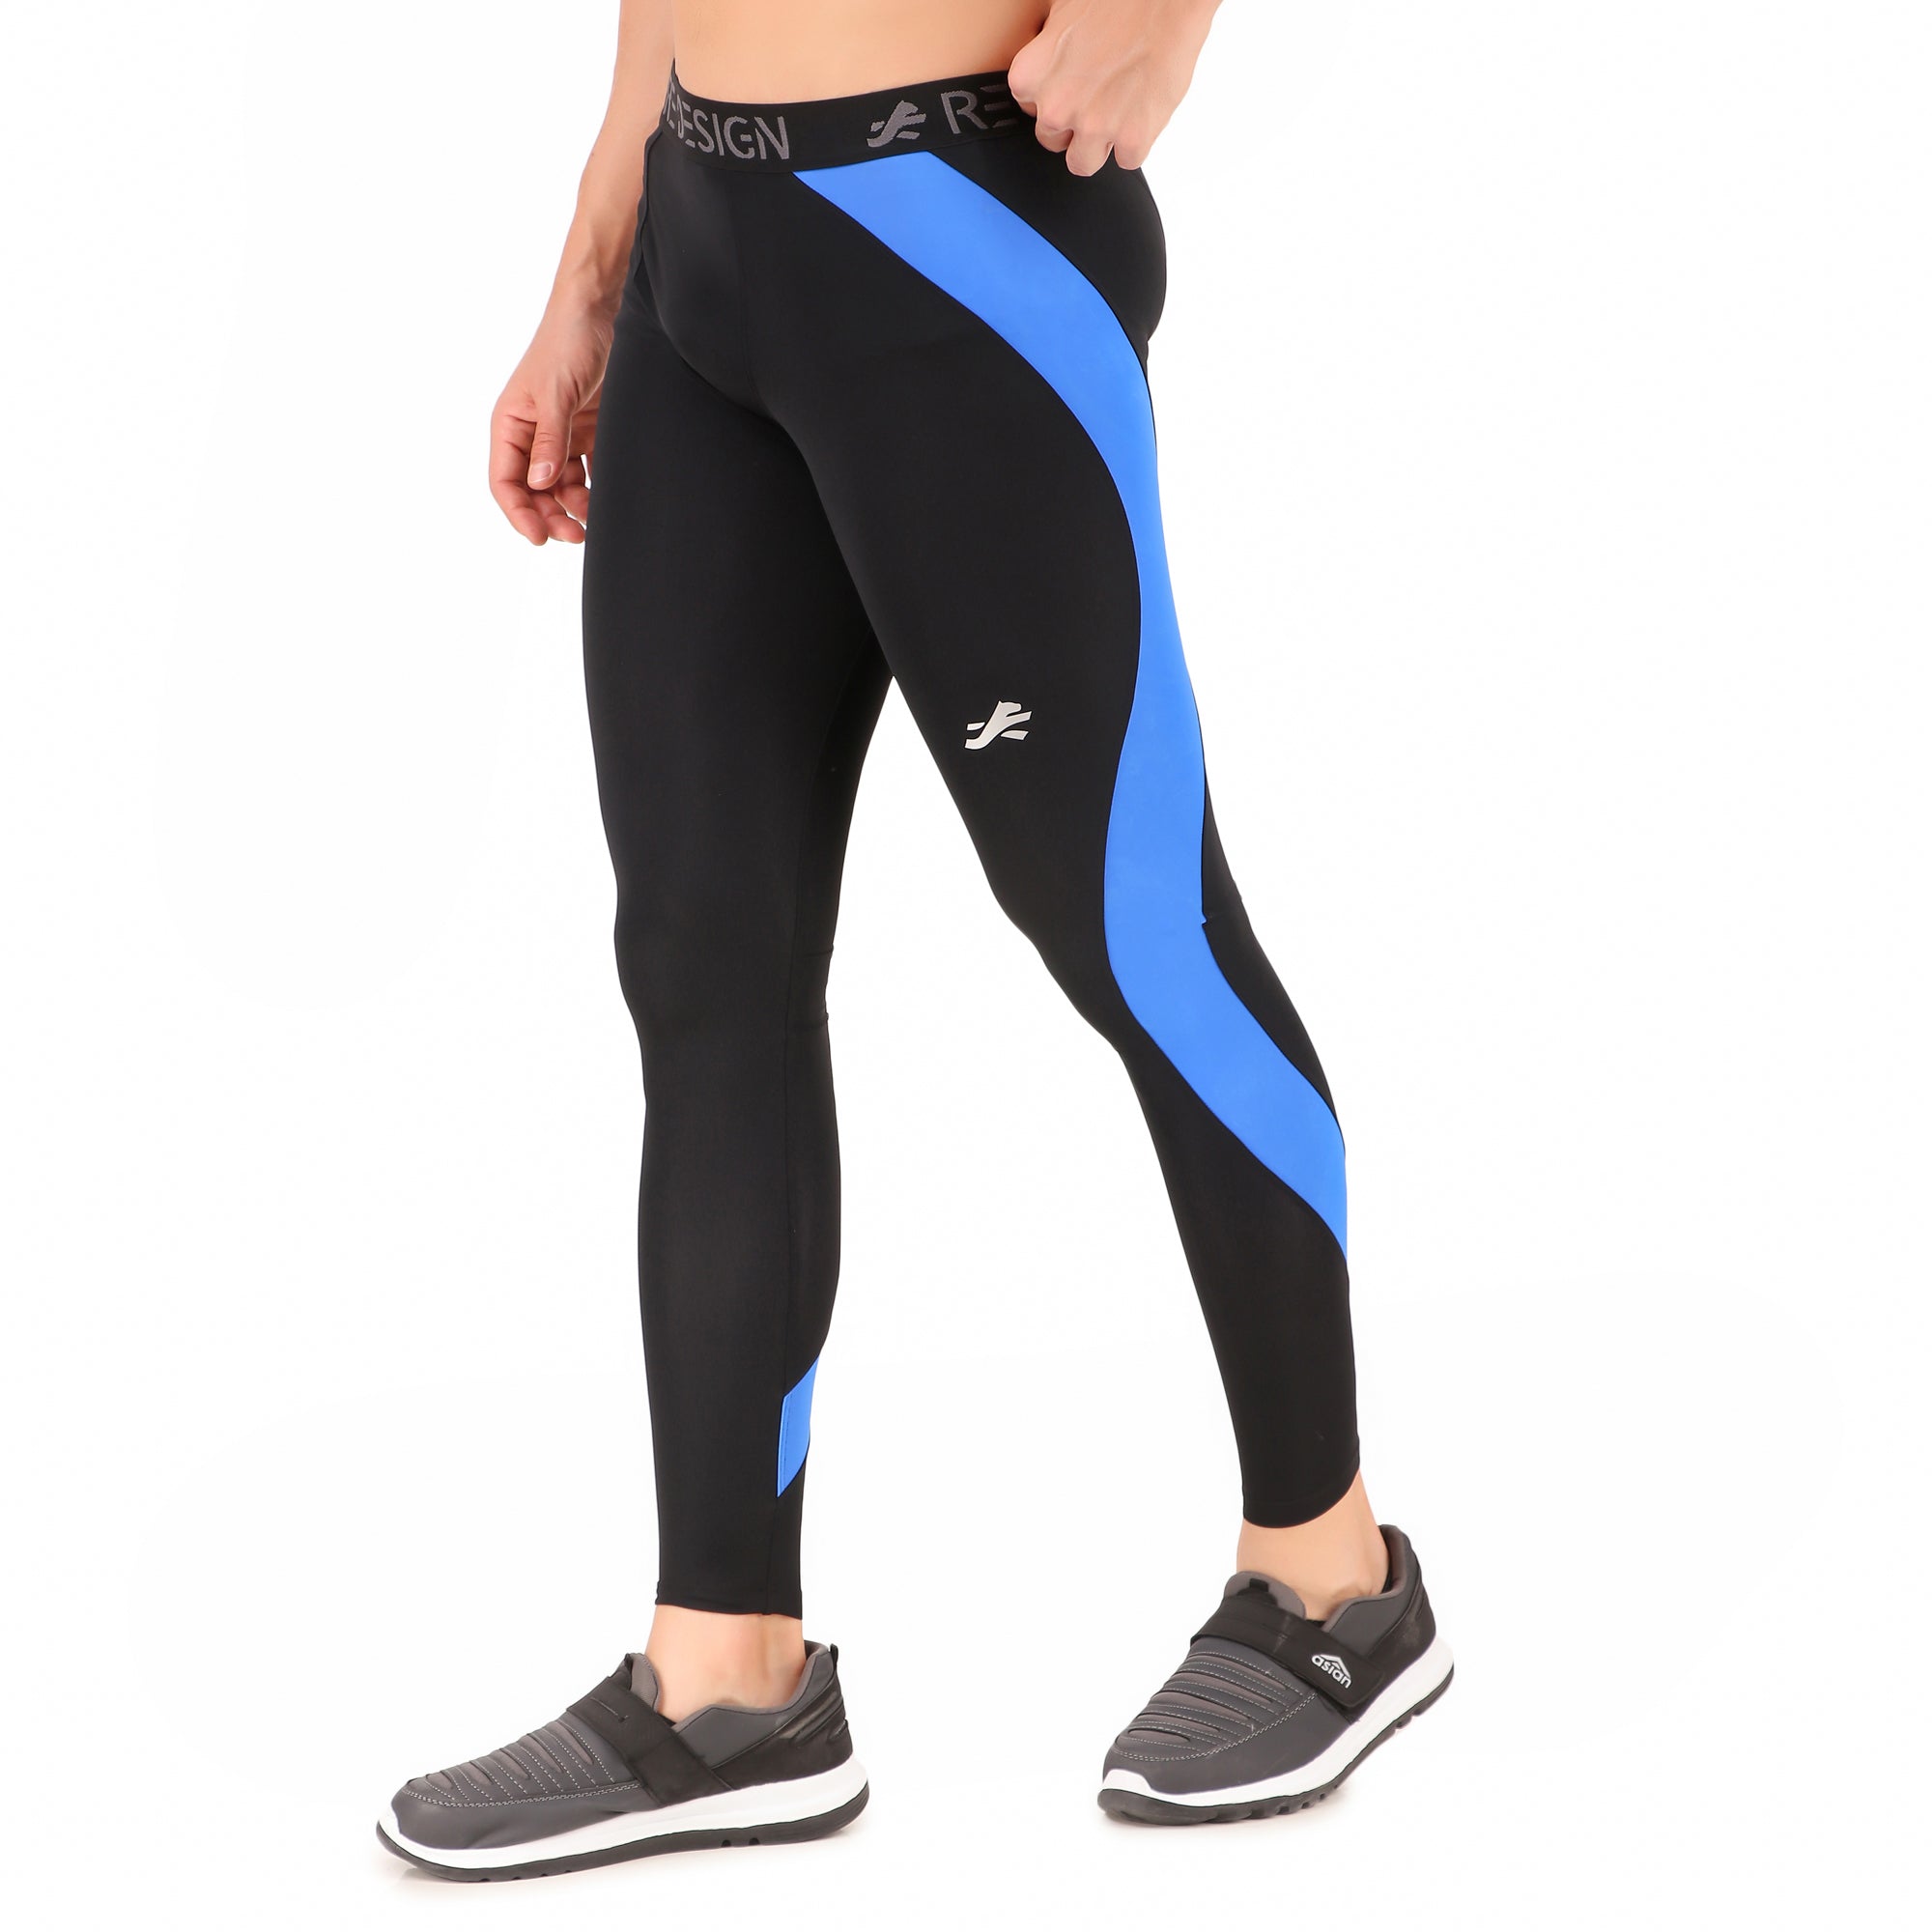 Nylon Compression Pant and Full Tights For Men (BLACK/ROYAL BLUE)